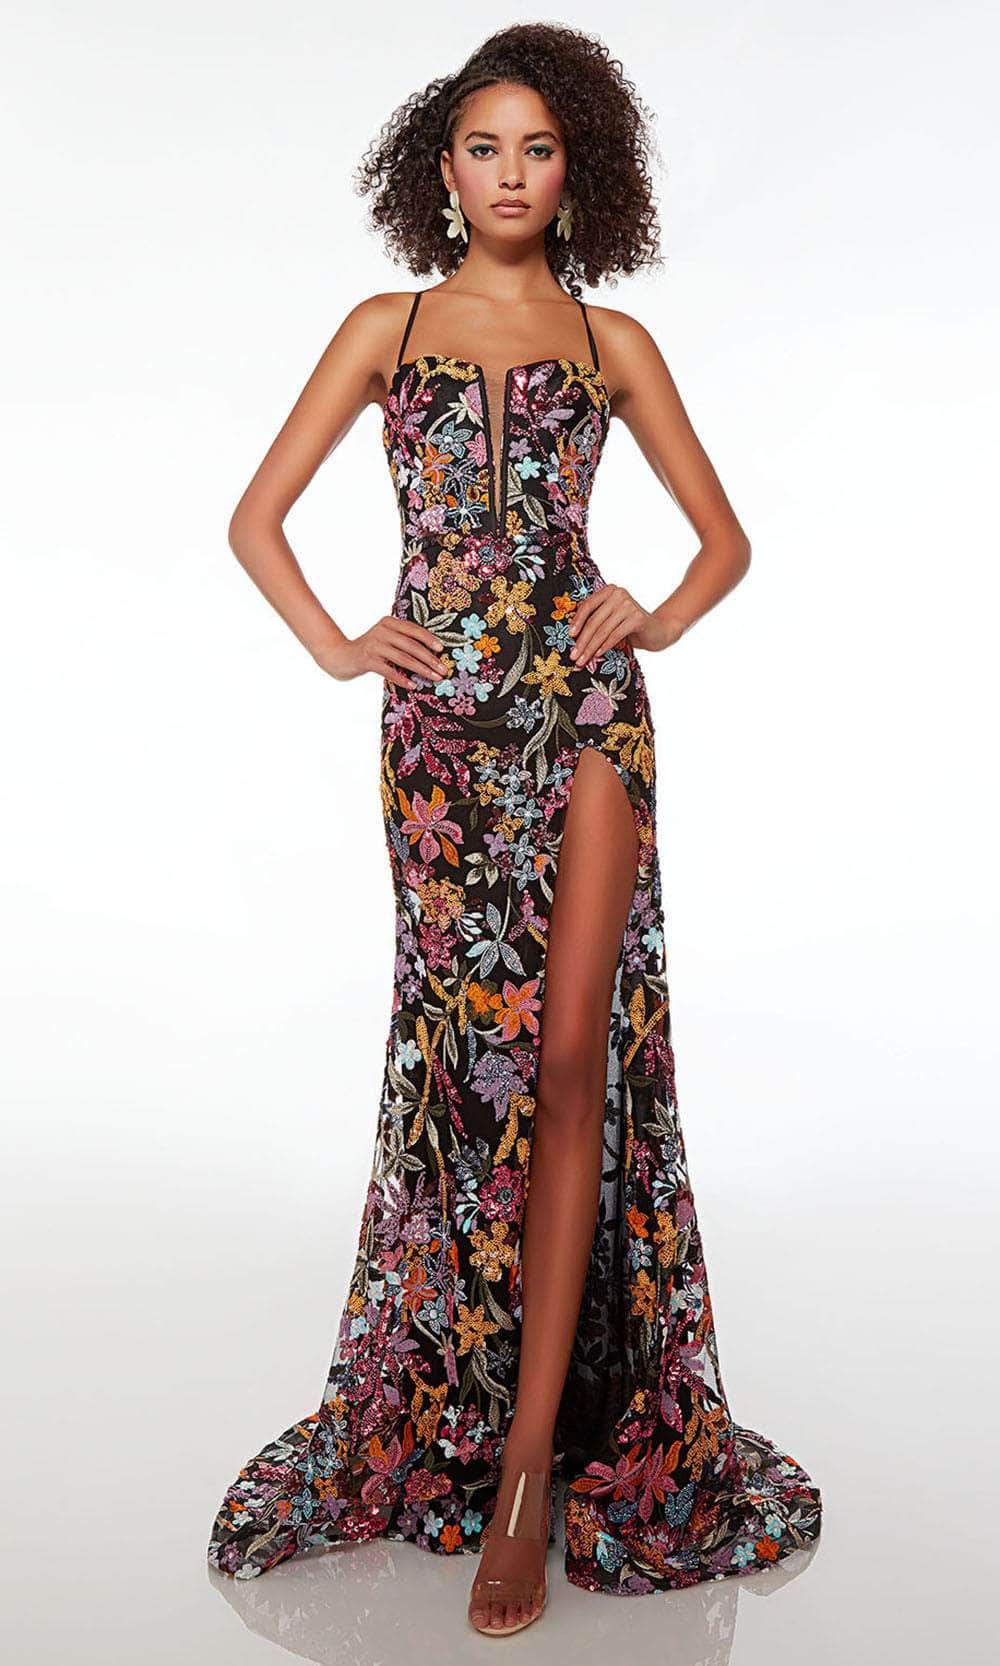 Alyce Paris 61690 - Sleeveless Floral Sequined Embellished Prom Dress
